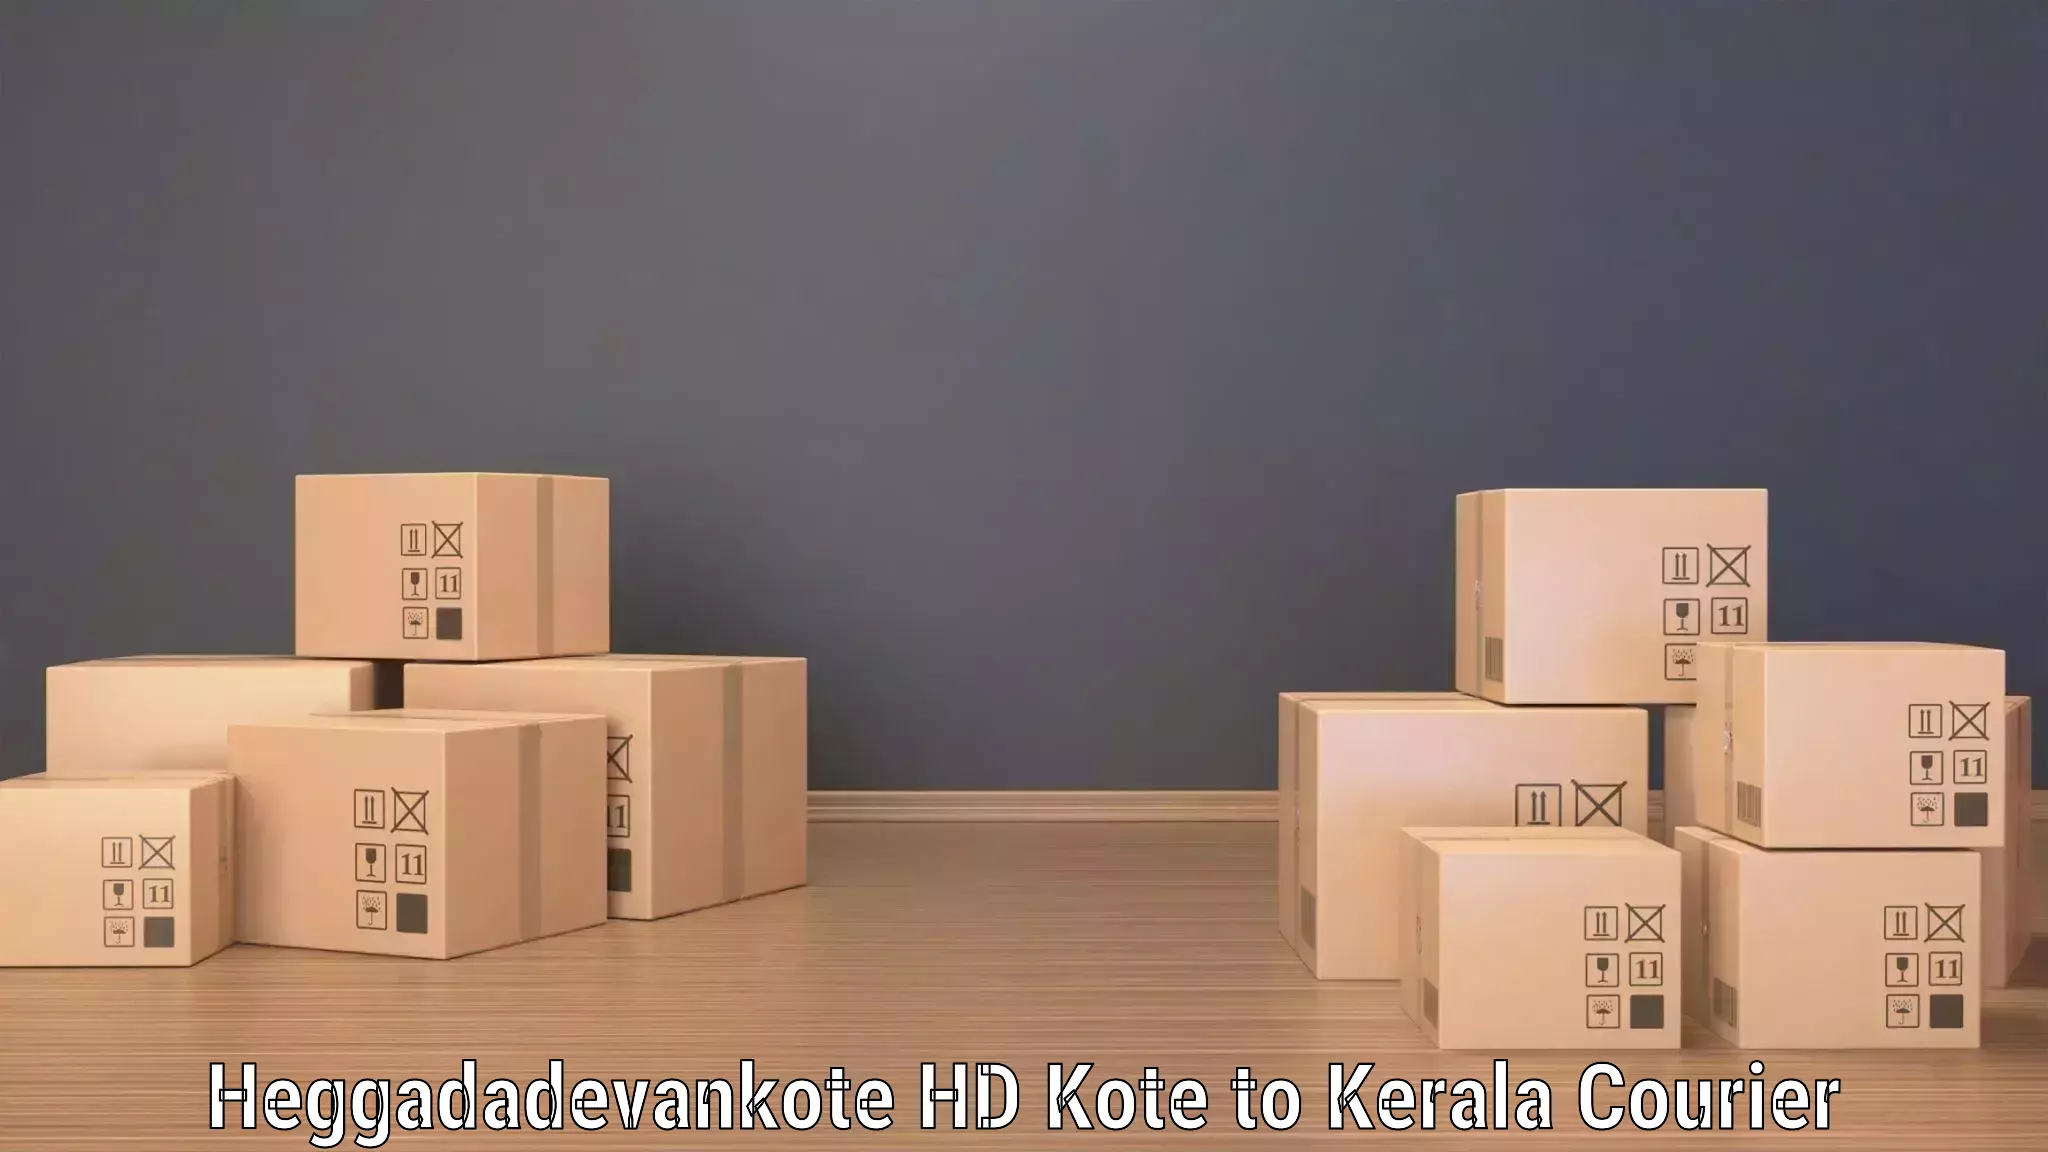 Efficient shipping operations in Heggadadevankote HD Kote to Nedumangad